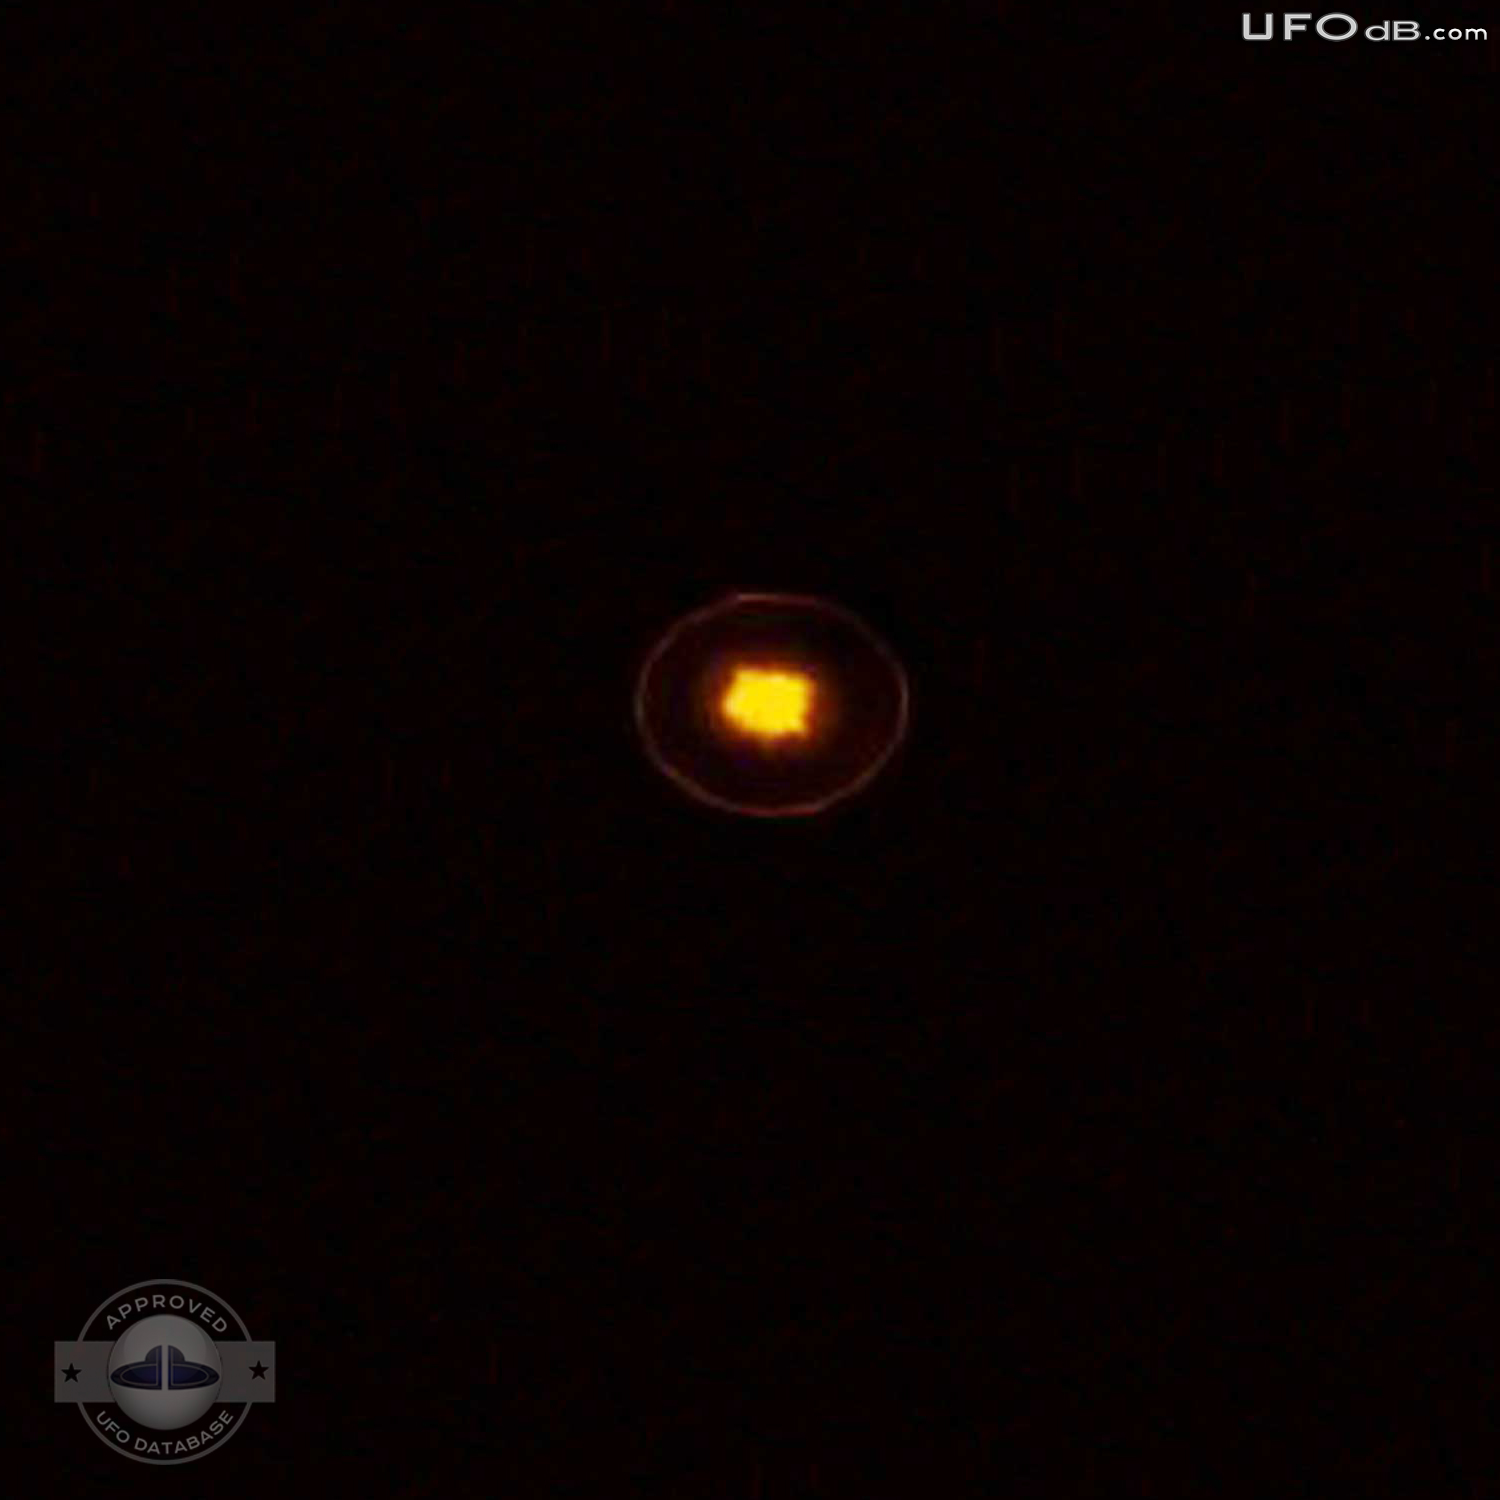 Brest citizen get pictures of two differents UFOs in the same night UFO Picture #368-1